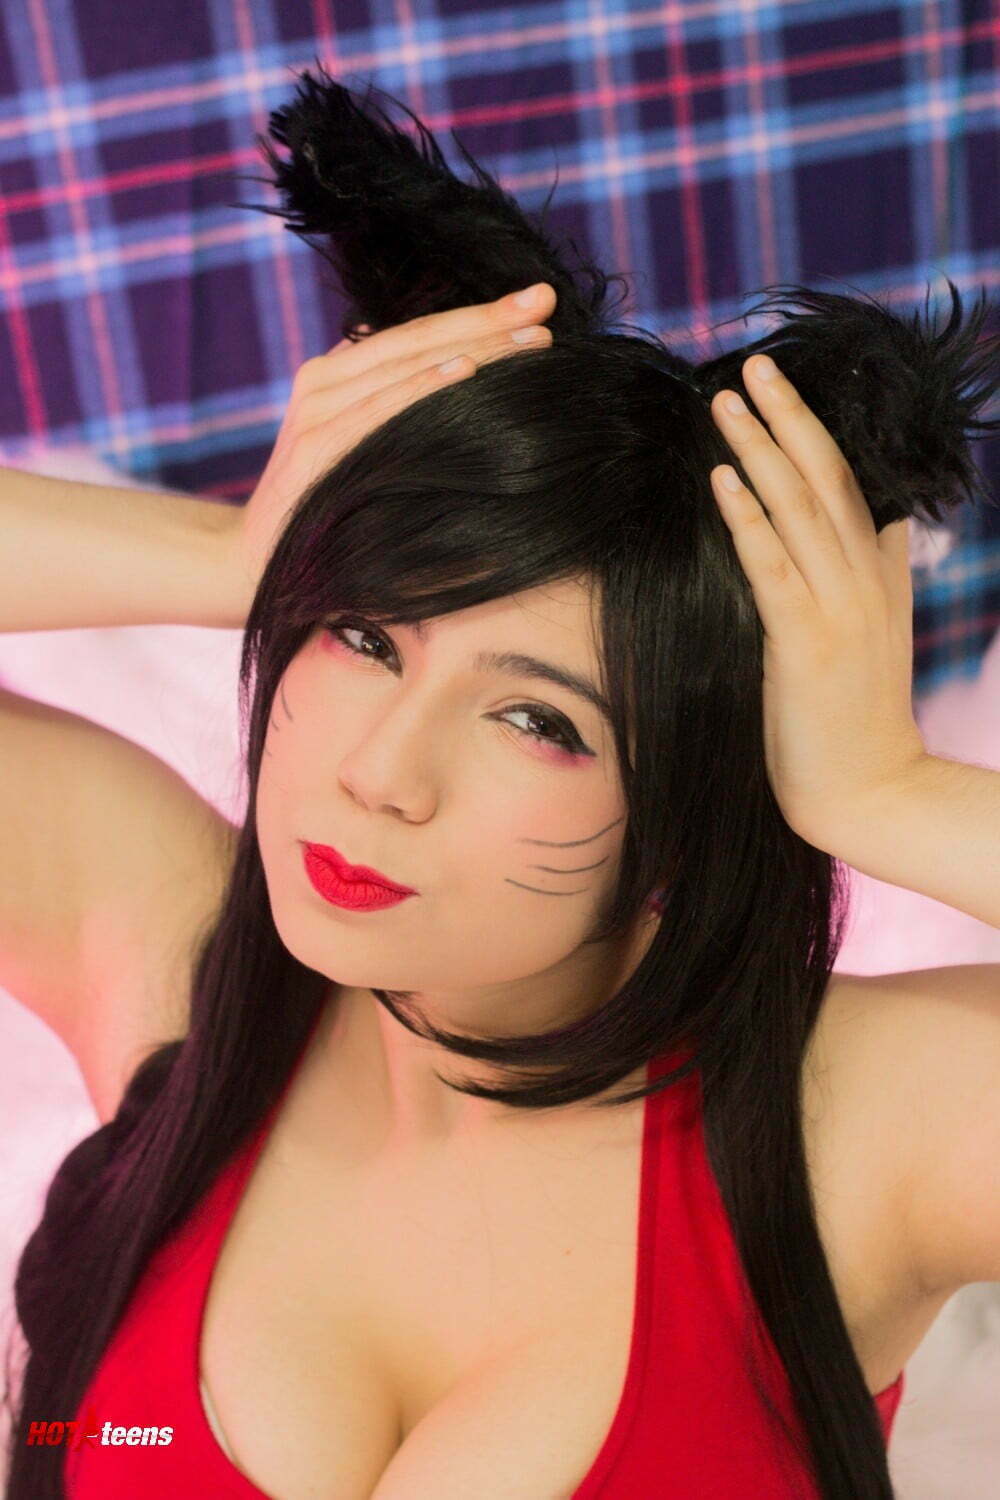 League Of Legends Ahri Naked Cosplay Big Tits Photoshoot